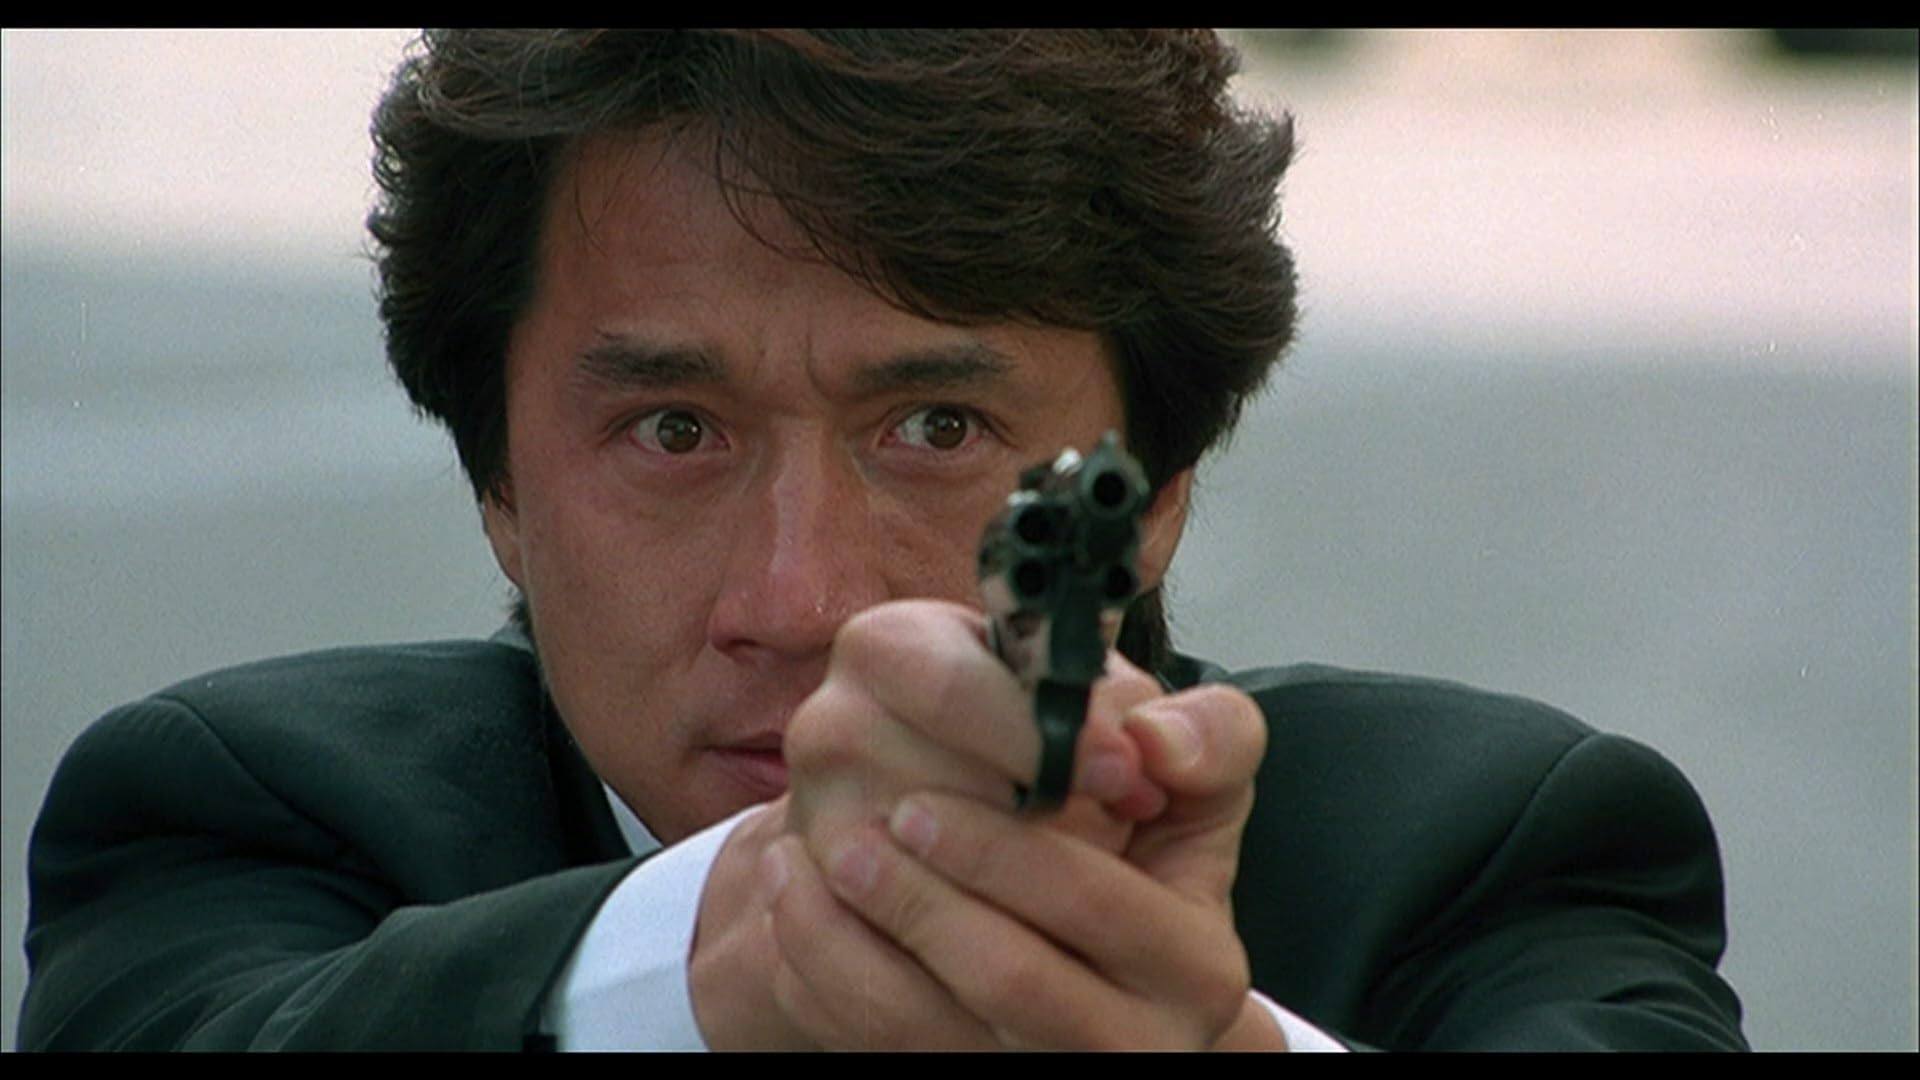 Jackie Chan in a still from “Crime Story” (1993).